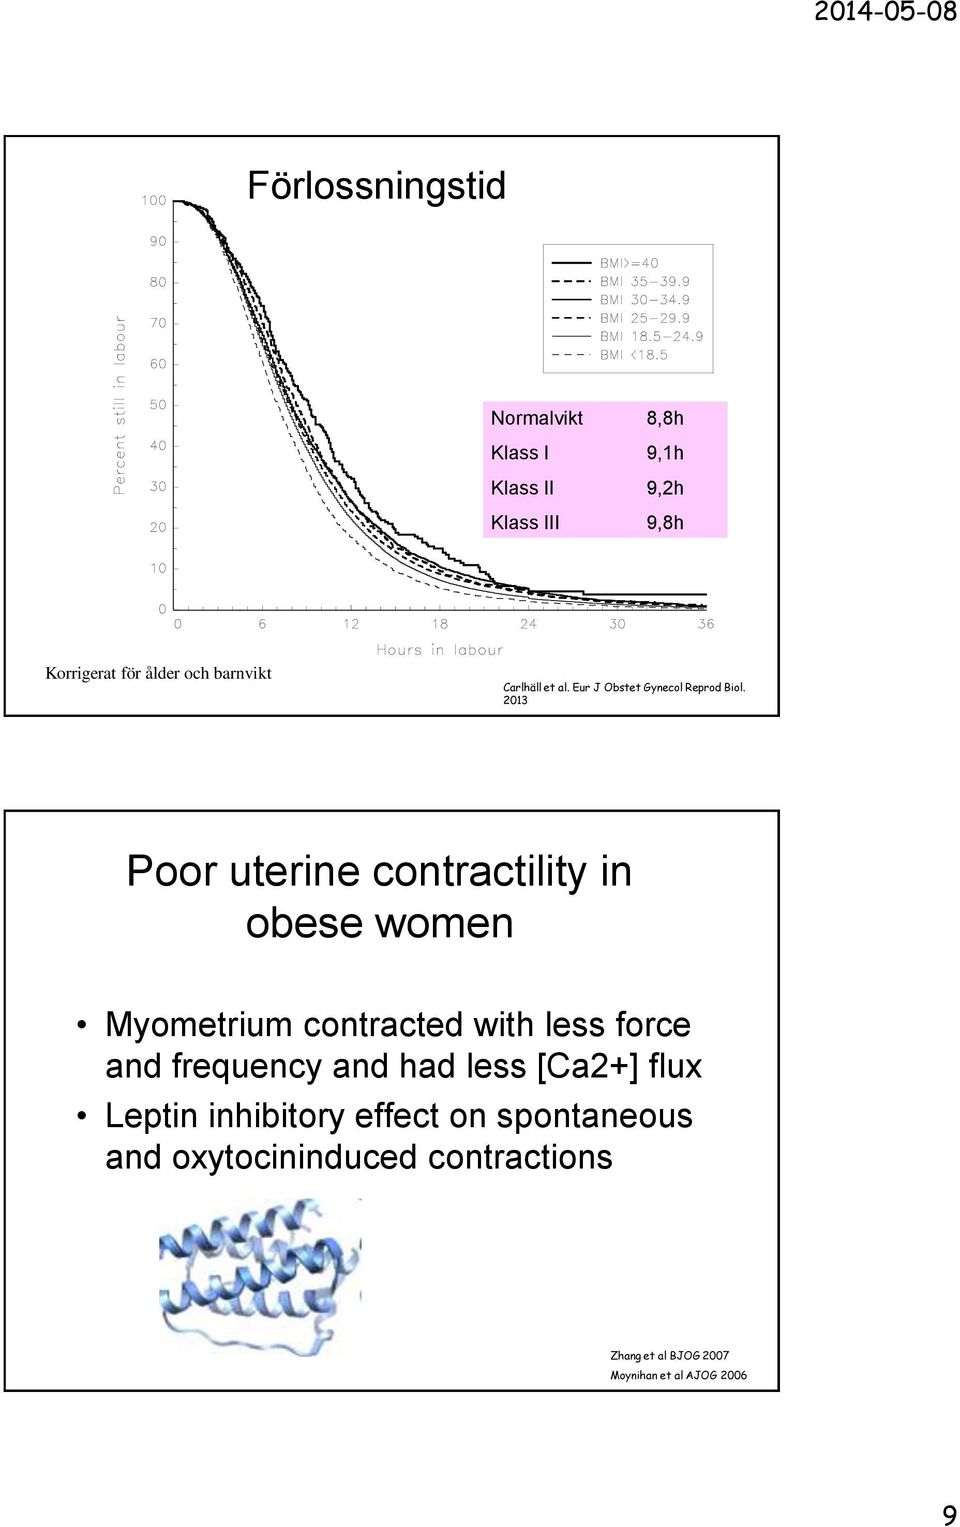 Poor uterine contractility in obese women Myometrium contracted with less force and frequency and